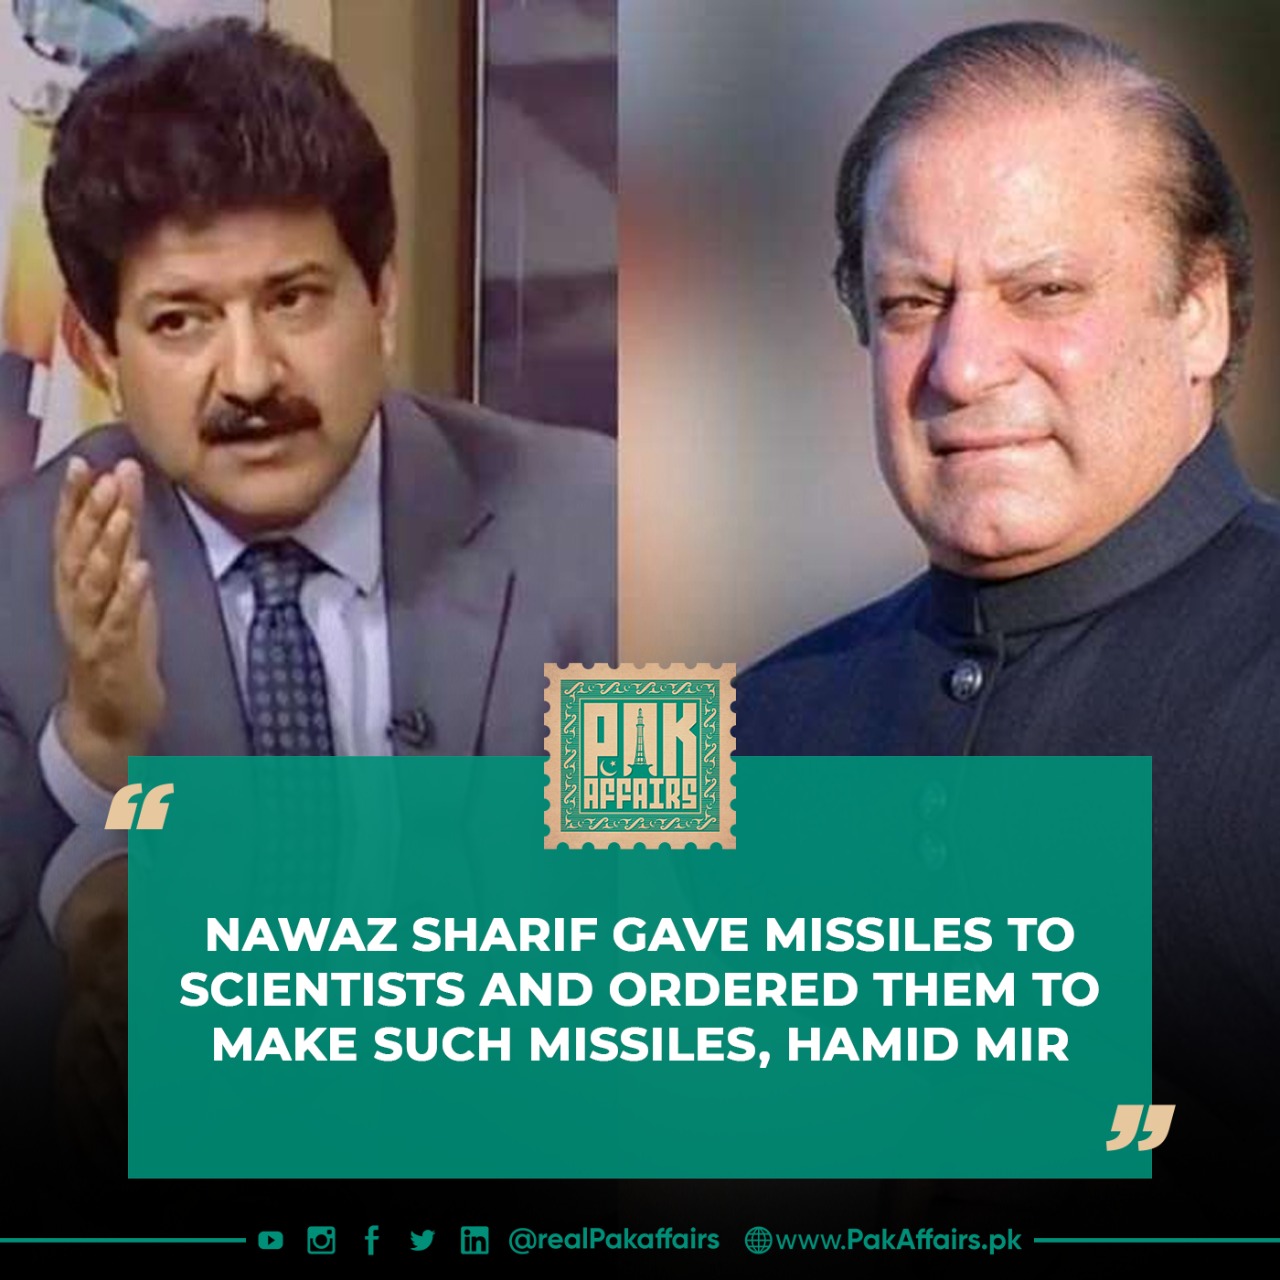 Nawaz Sharif gave missiles to scientists and ordered them to make such missiles, Hamid Mir.